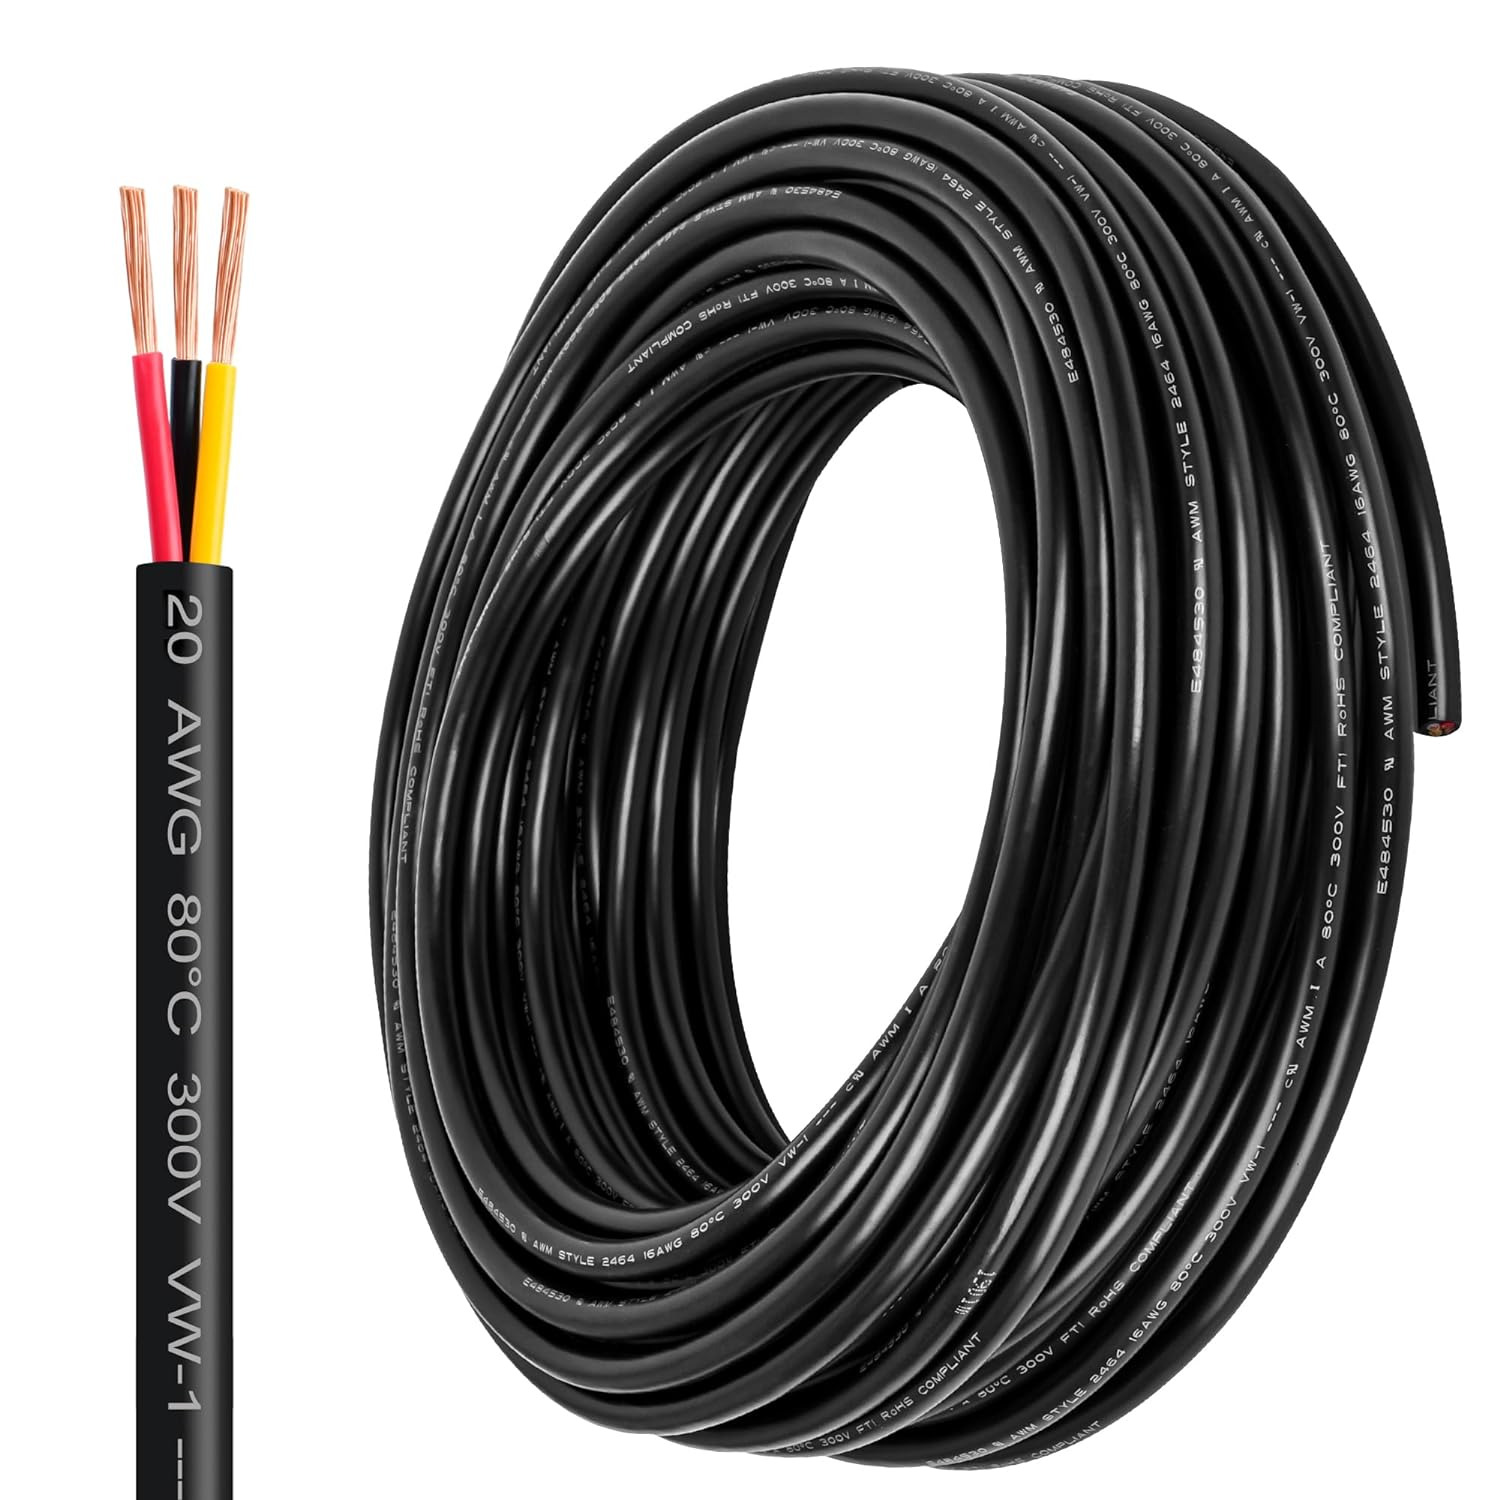 20 Gauge Wire 3 Conductor,20 AWG Electrical Wire Stranded PVC Cord Oxygen-Free C